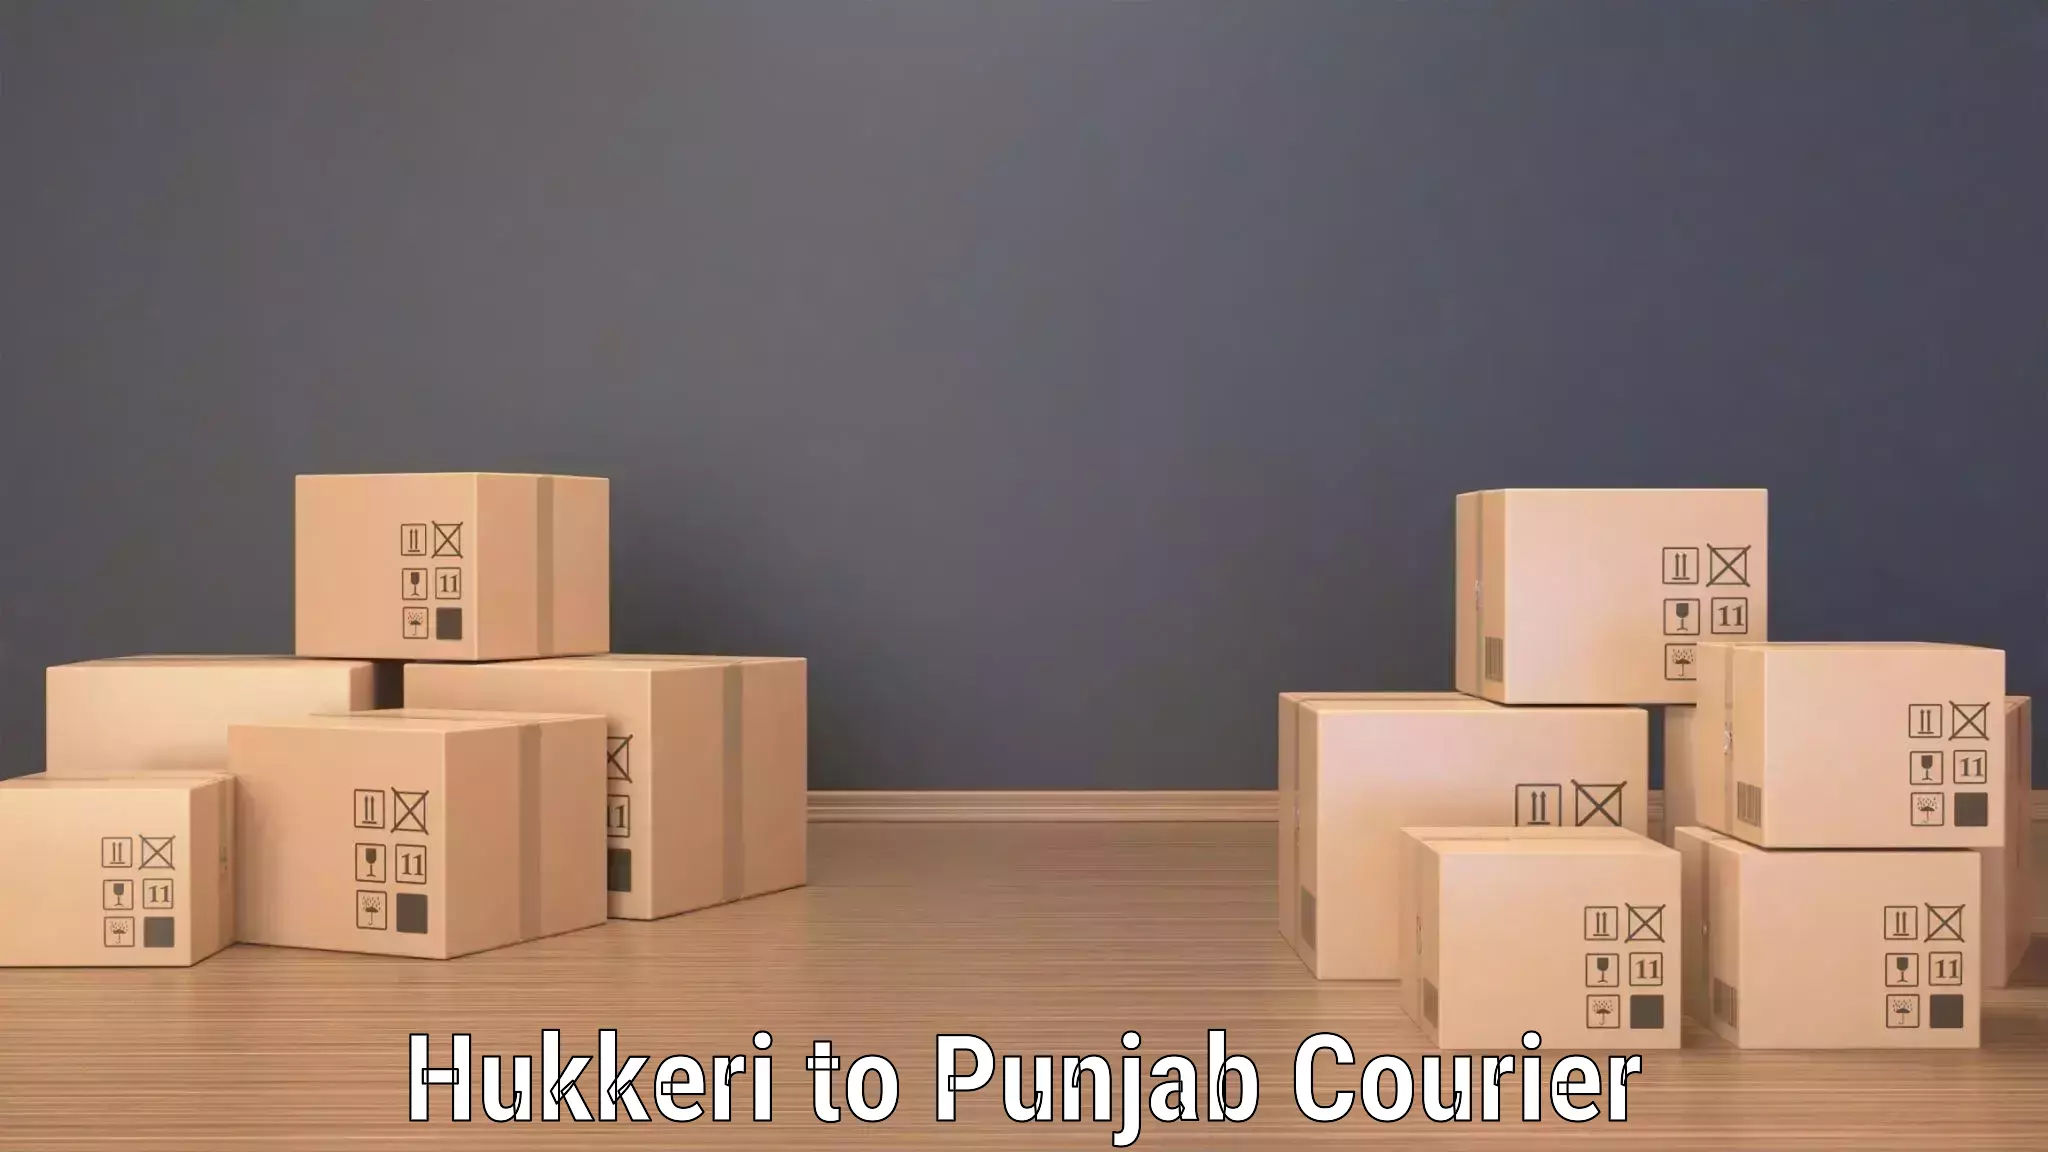 Tailored freight services Hukkeri to Mohali